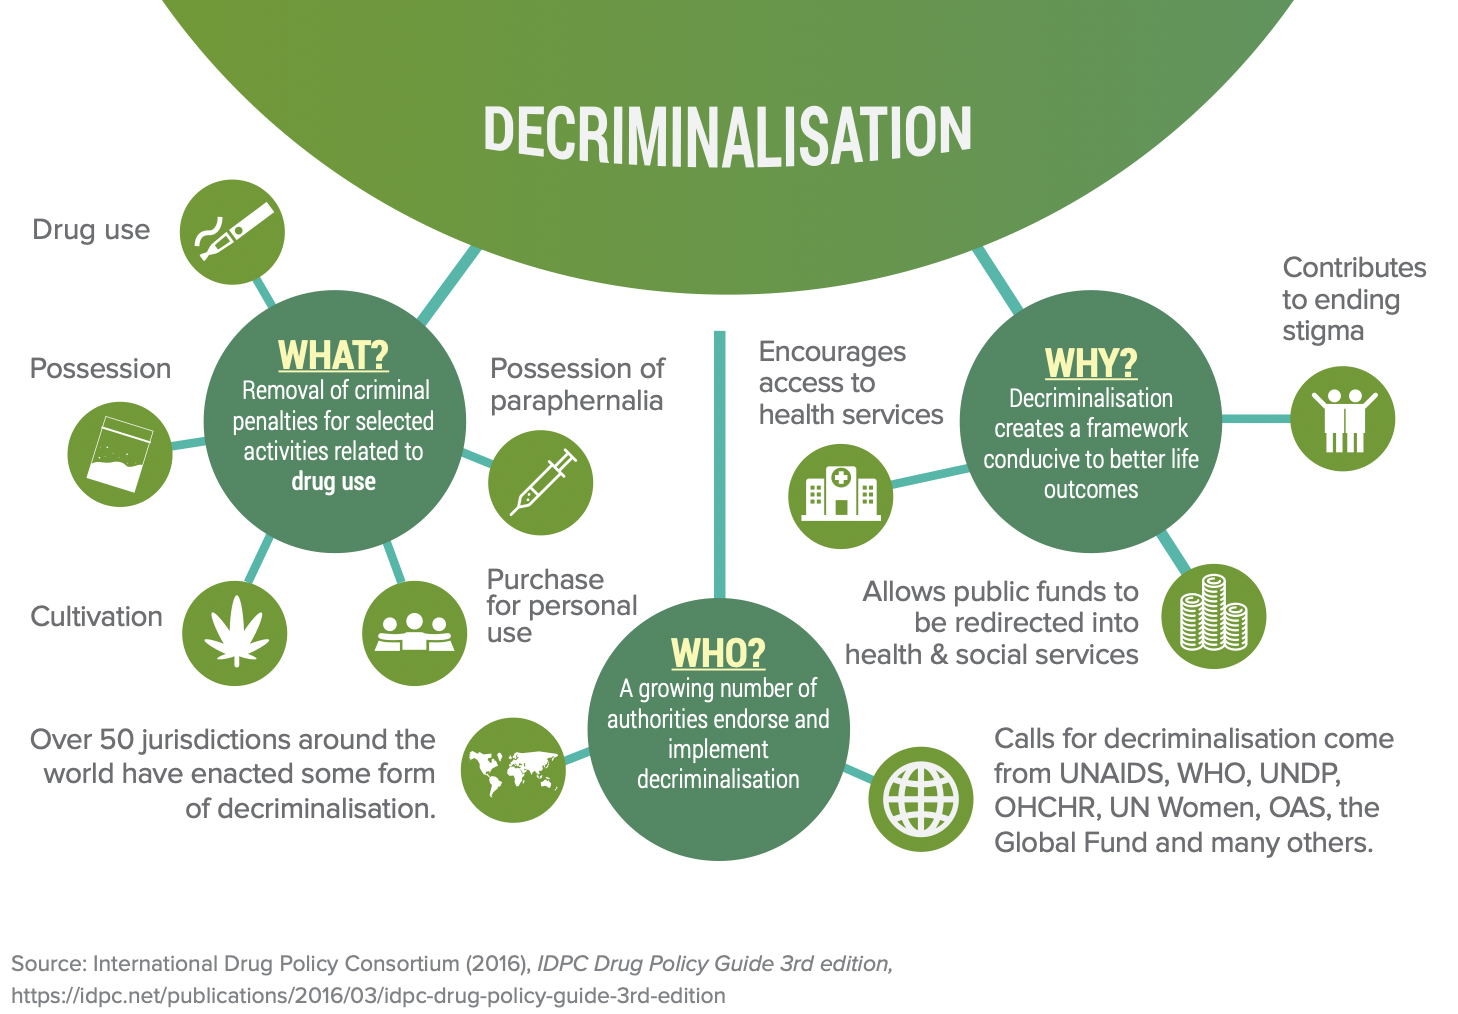 Concept map-like diagram connecting the what, who, and why of decriminalization using circles linked with lines.